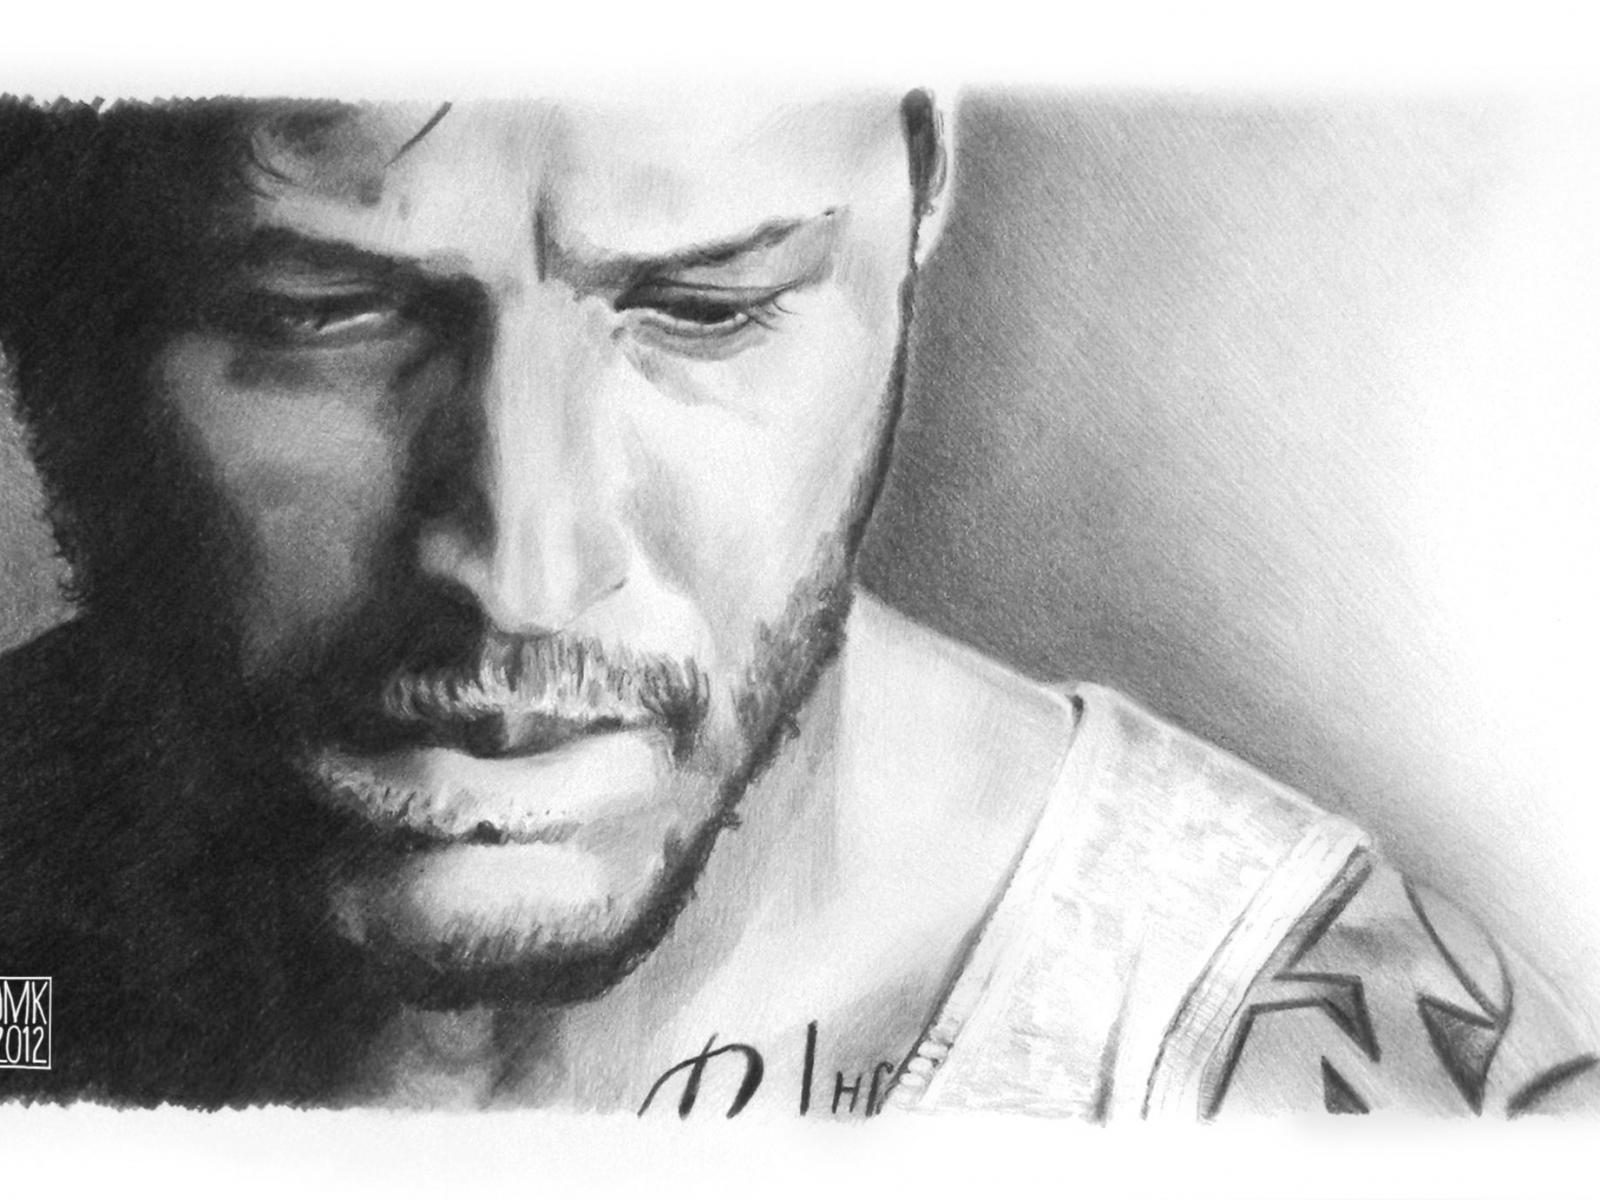 Tom Hardy HD Wallpaper And Photo download